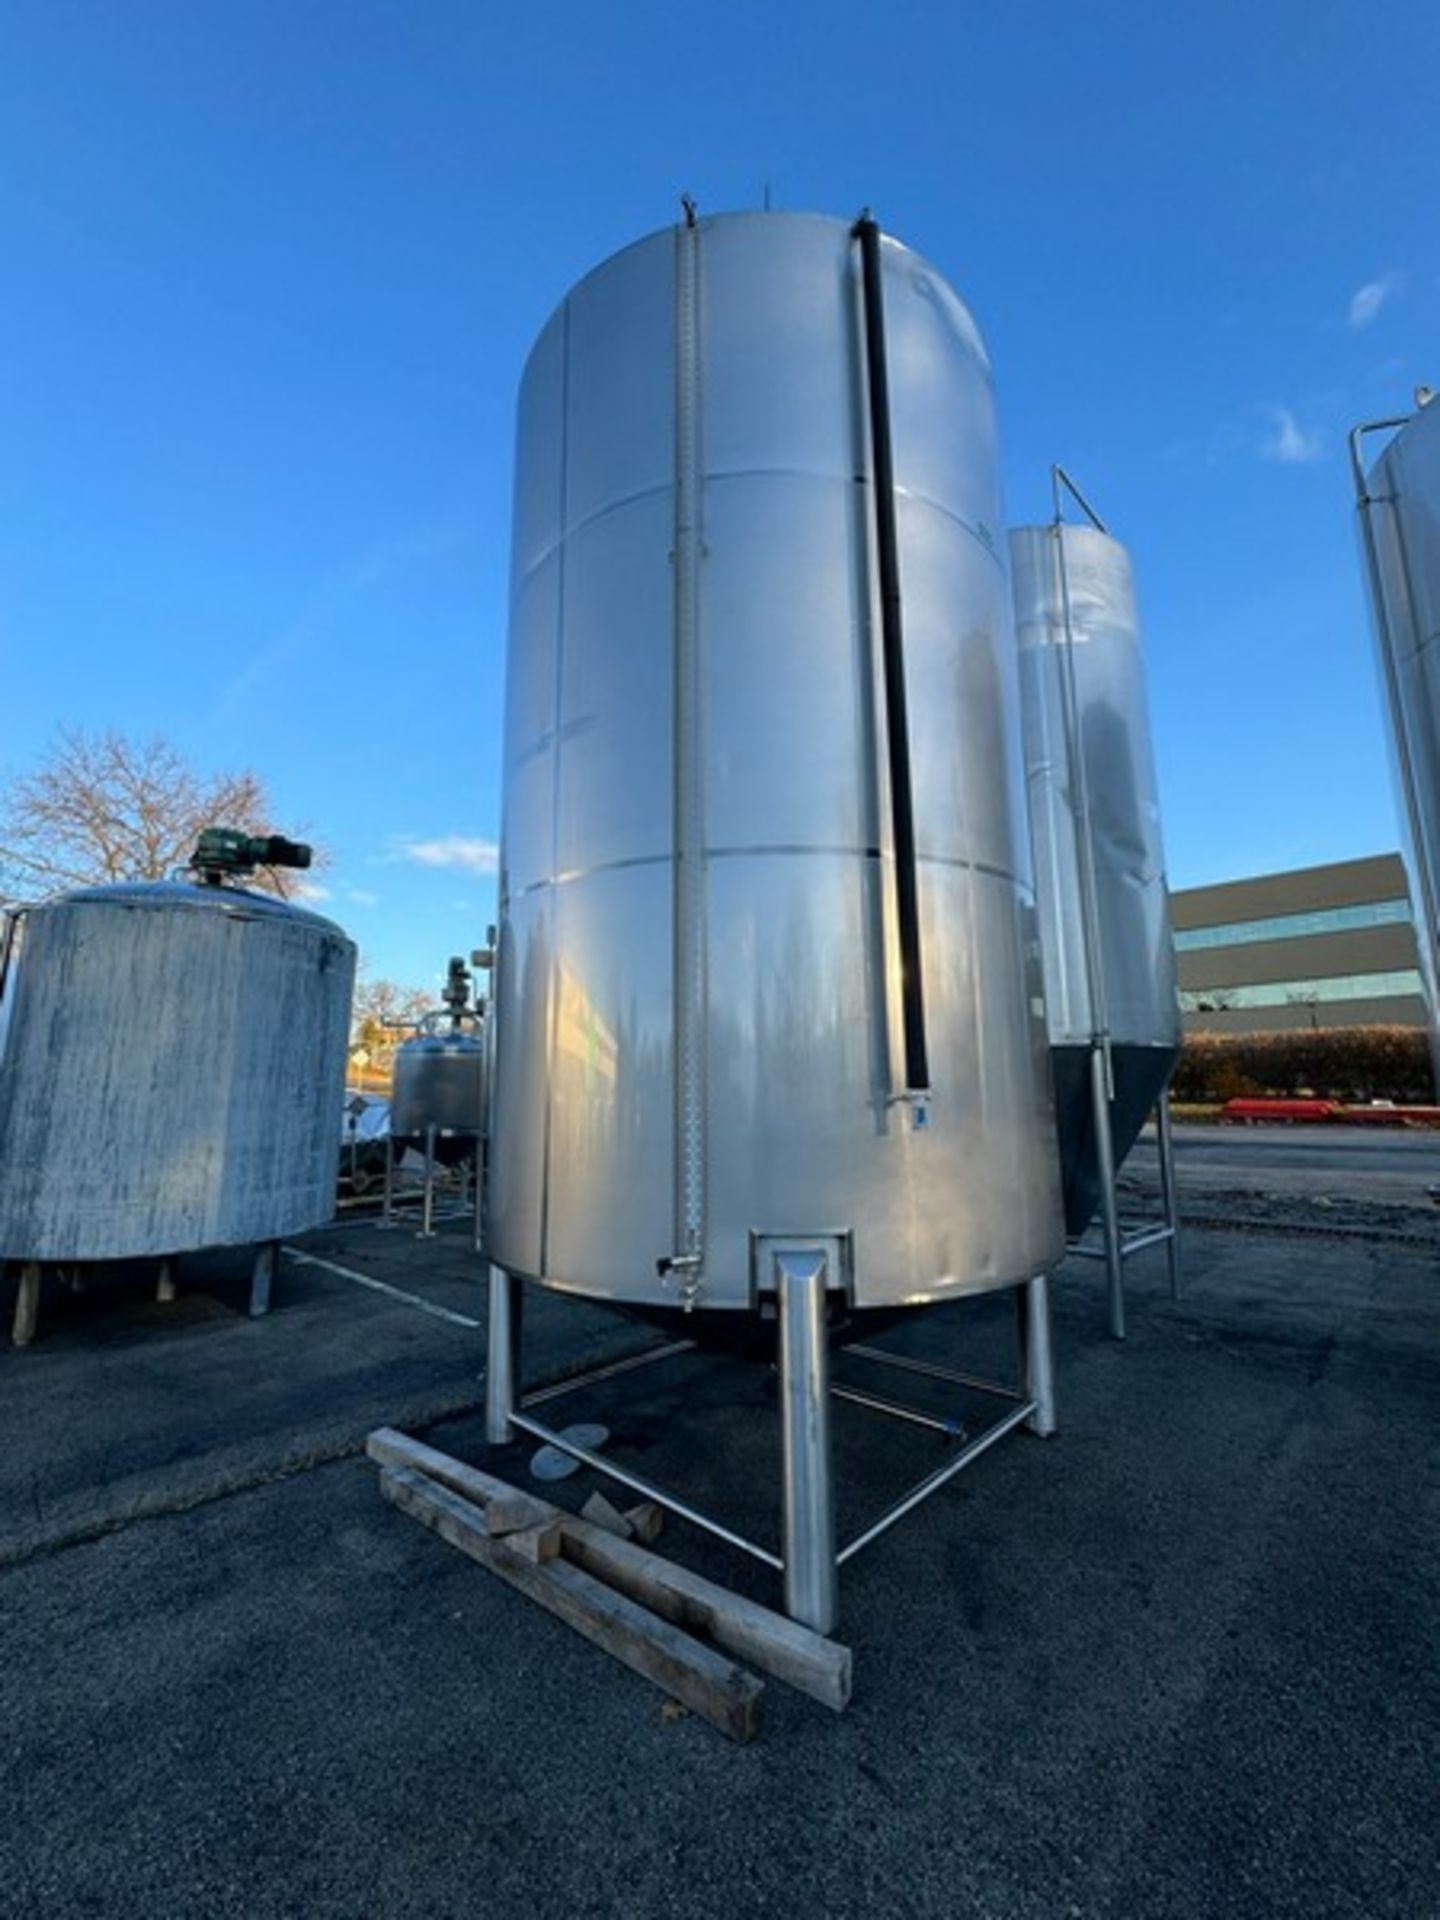 2012 Specific Mechanical Systems 200 BBL Capacity S/S Cold Liquor Tank, S/N RMP-136-12-300, with S/S - Image 2 of 7